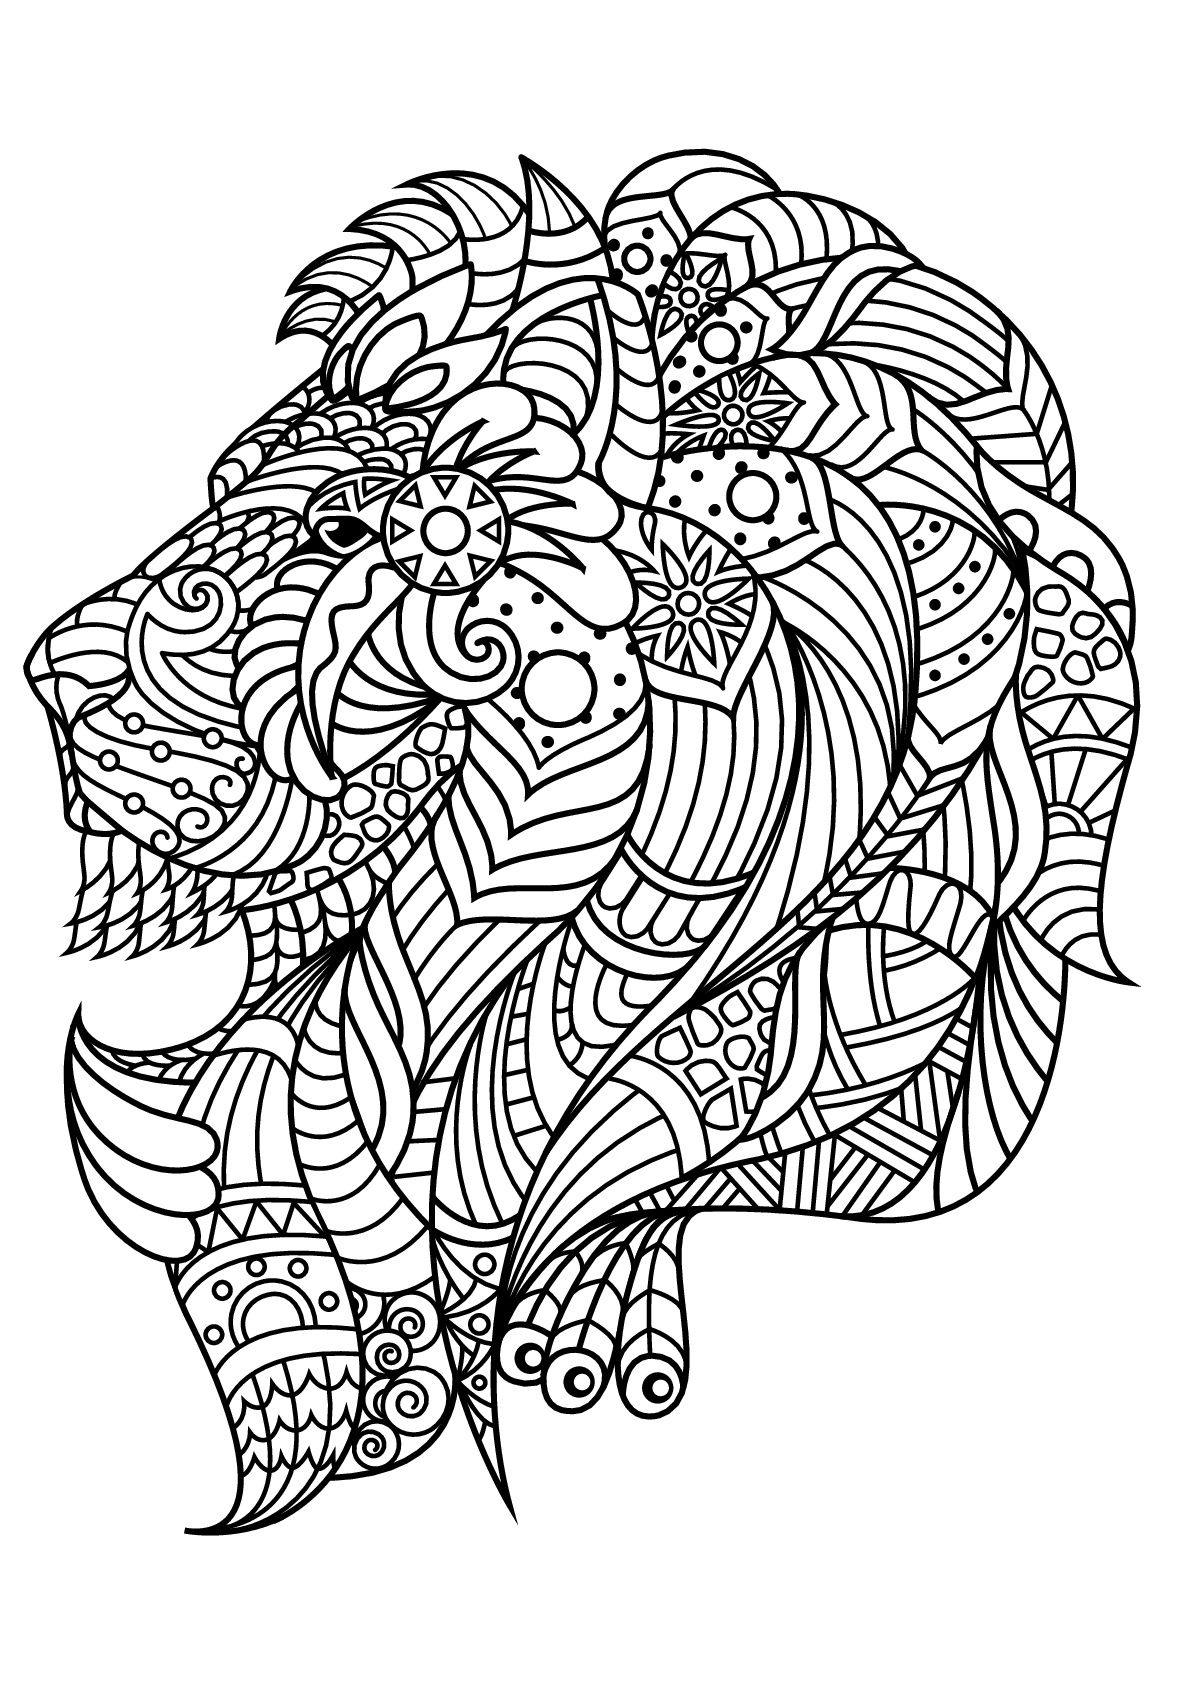 Download Free book lion - Lions Adult Coloring Pages